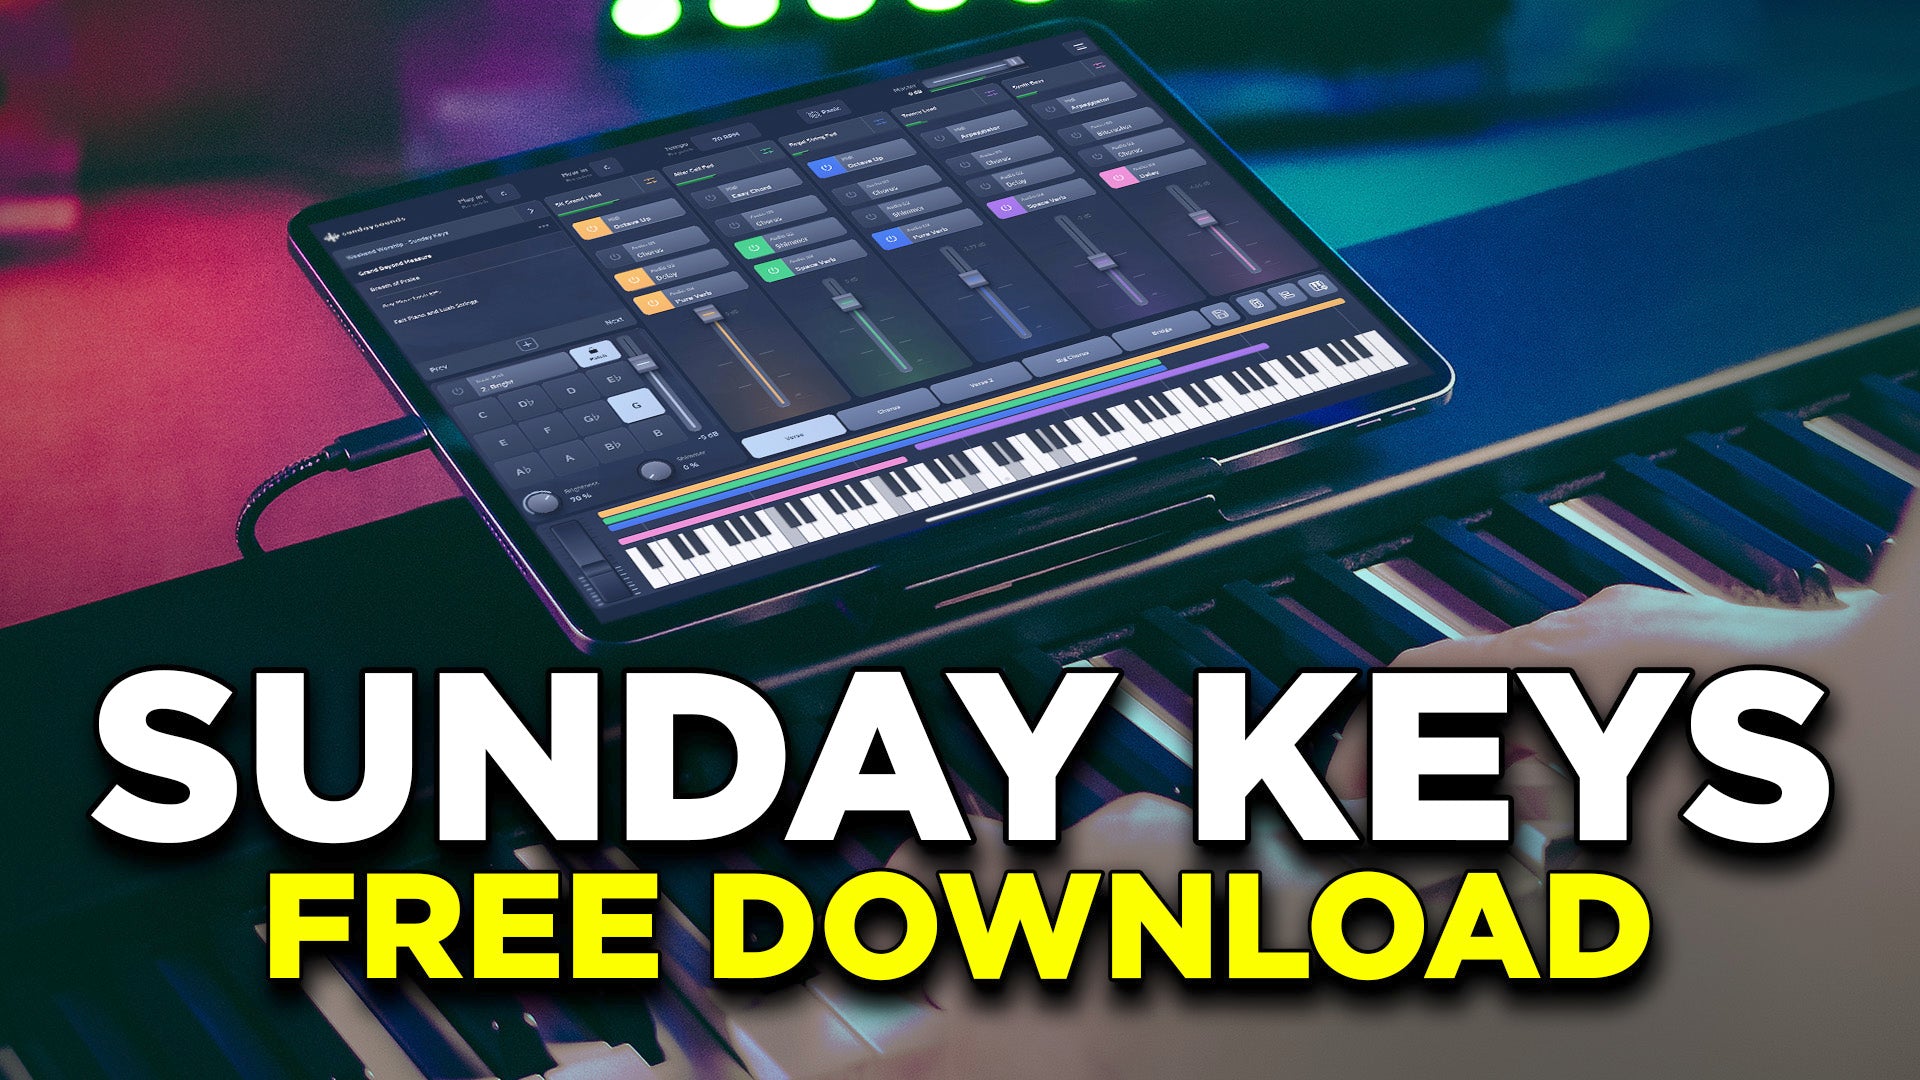 Try the Sunday Keys App - Free Download